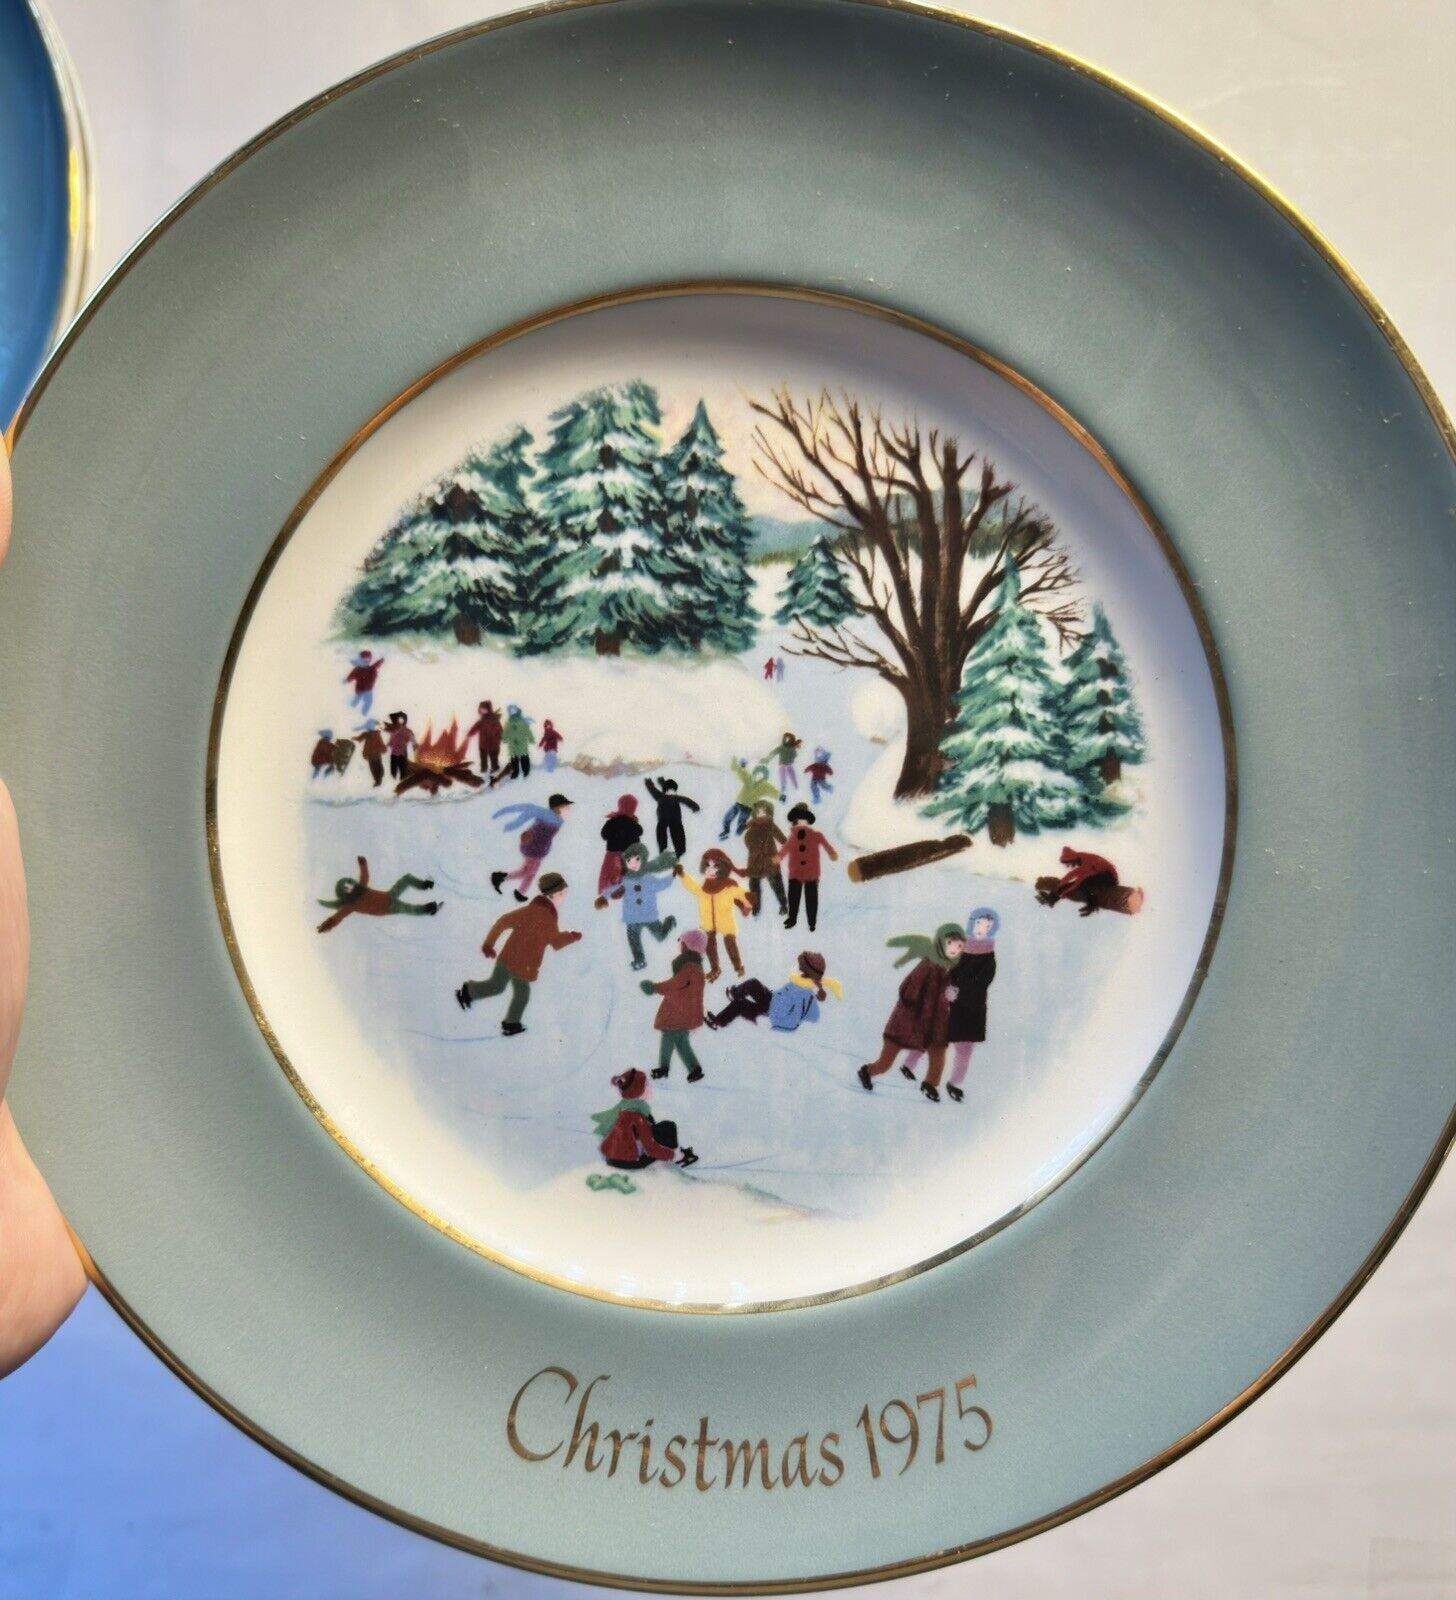 Christmas Avon Wedgewood, Enoch 1975 Plate Very Good Condition